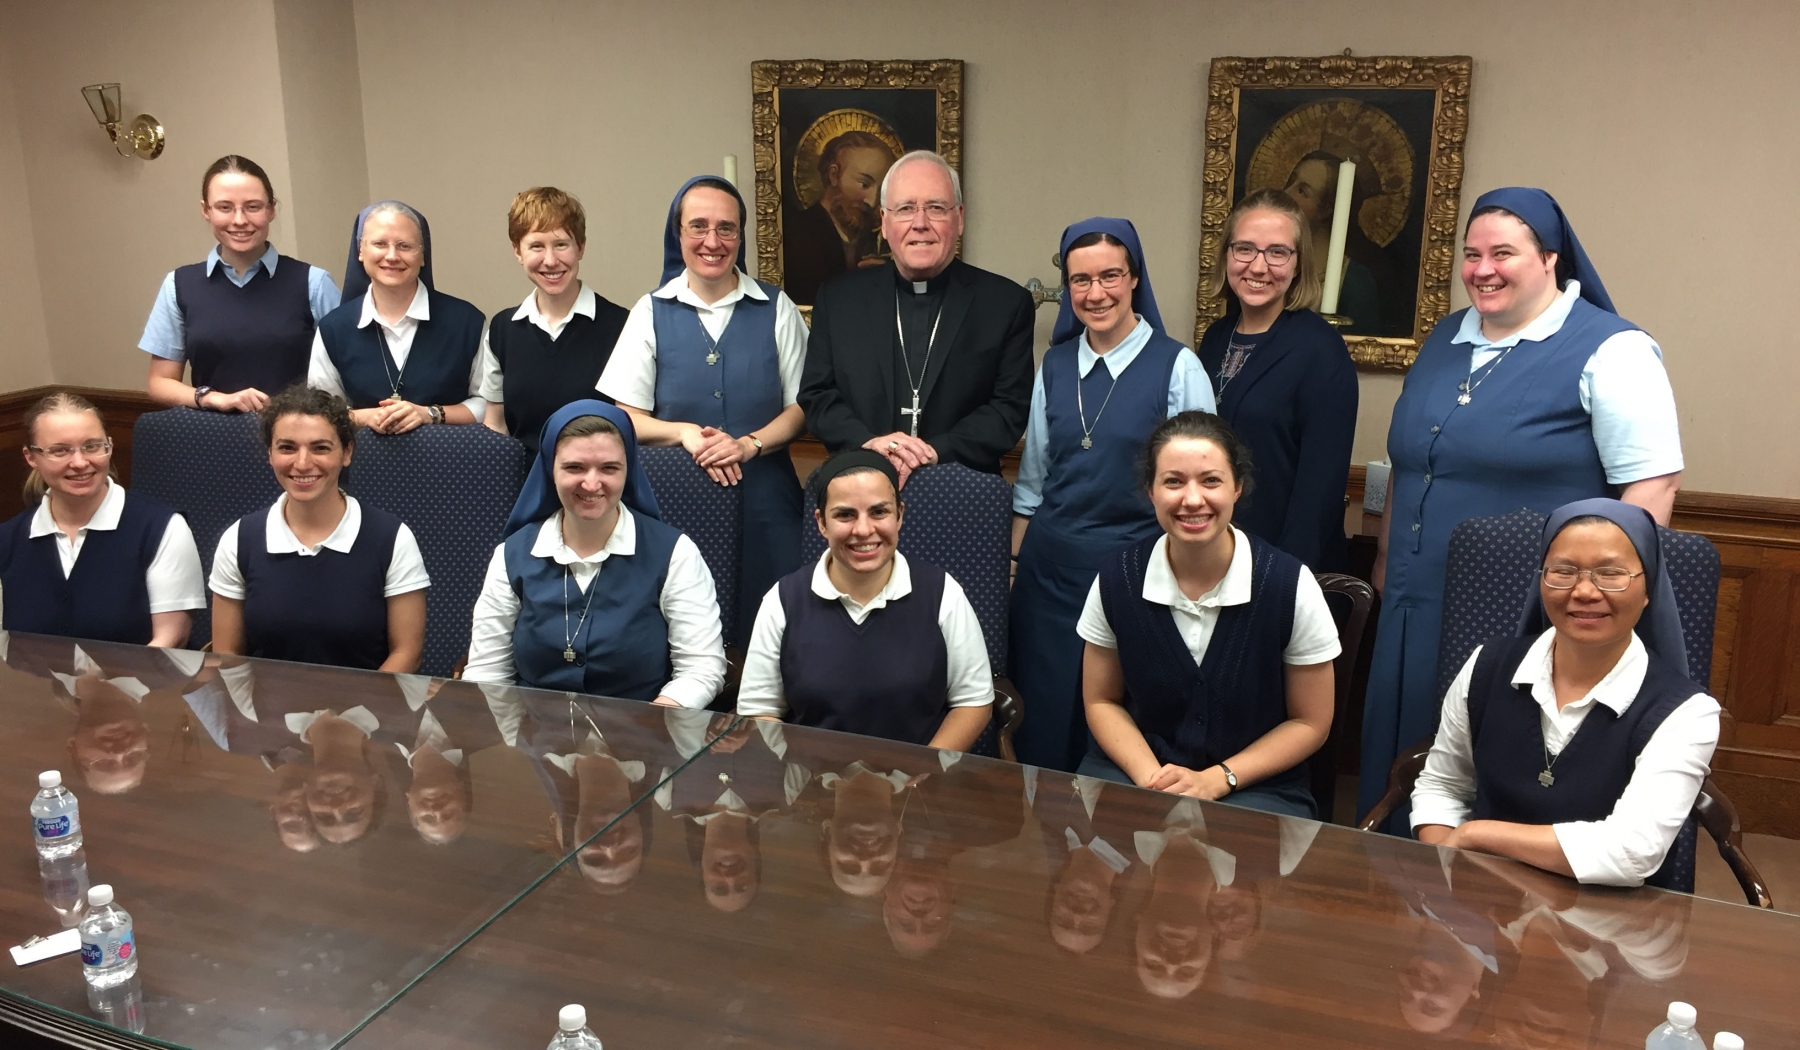 The Daughters of St. Paul meet with Bishop Richard J. Malone as Sister Emily Beata Marsh, FSP (right of Bishop Malone) prepares to make her profession of perpetual vows on June 23.